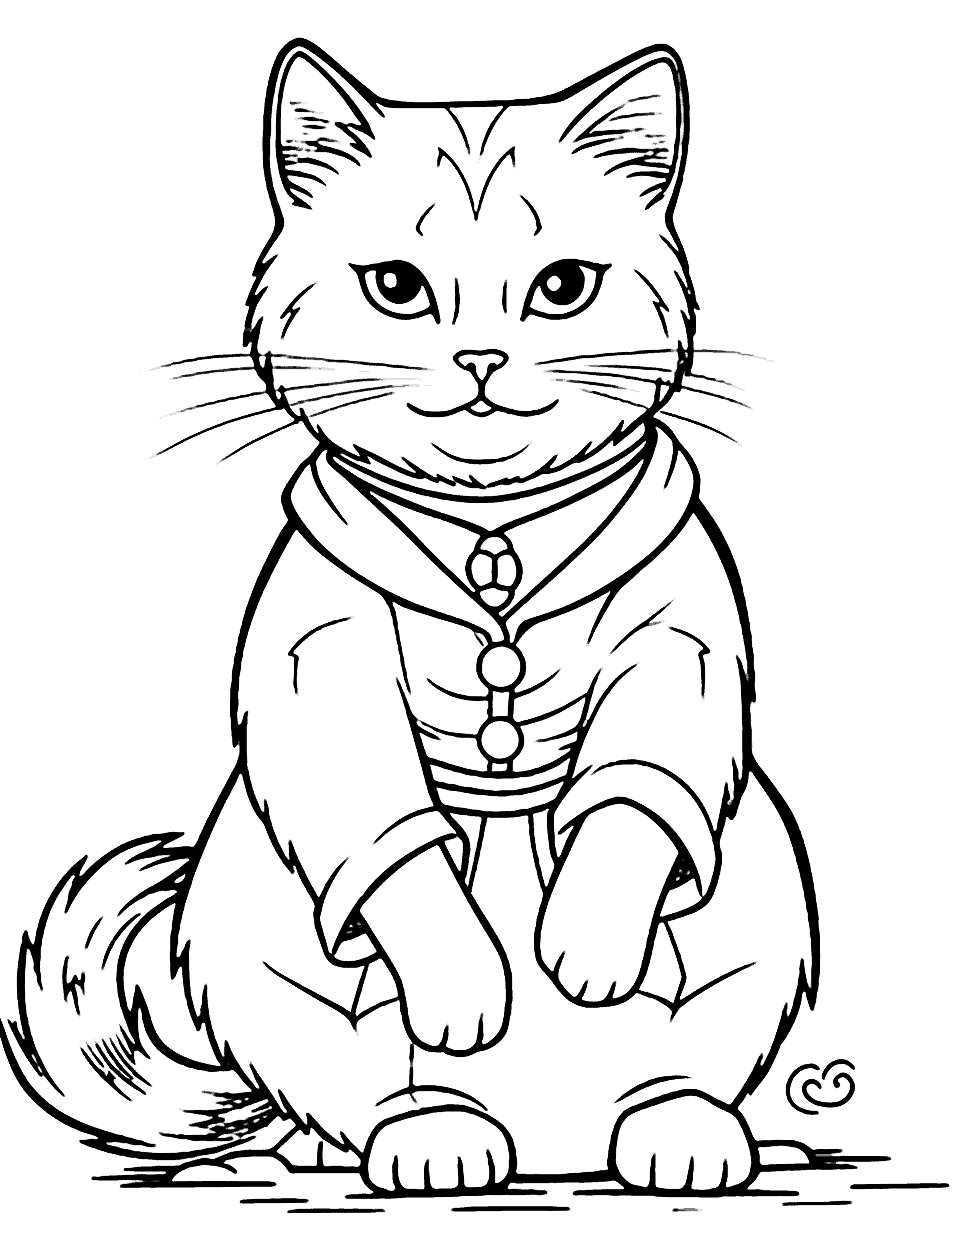 Cat Clan Leader Coloring Page - A regal cat clan leader addressing its subjects from a higher ground.